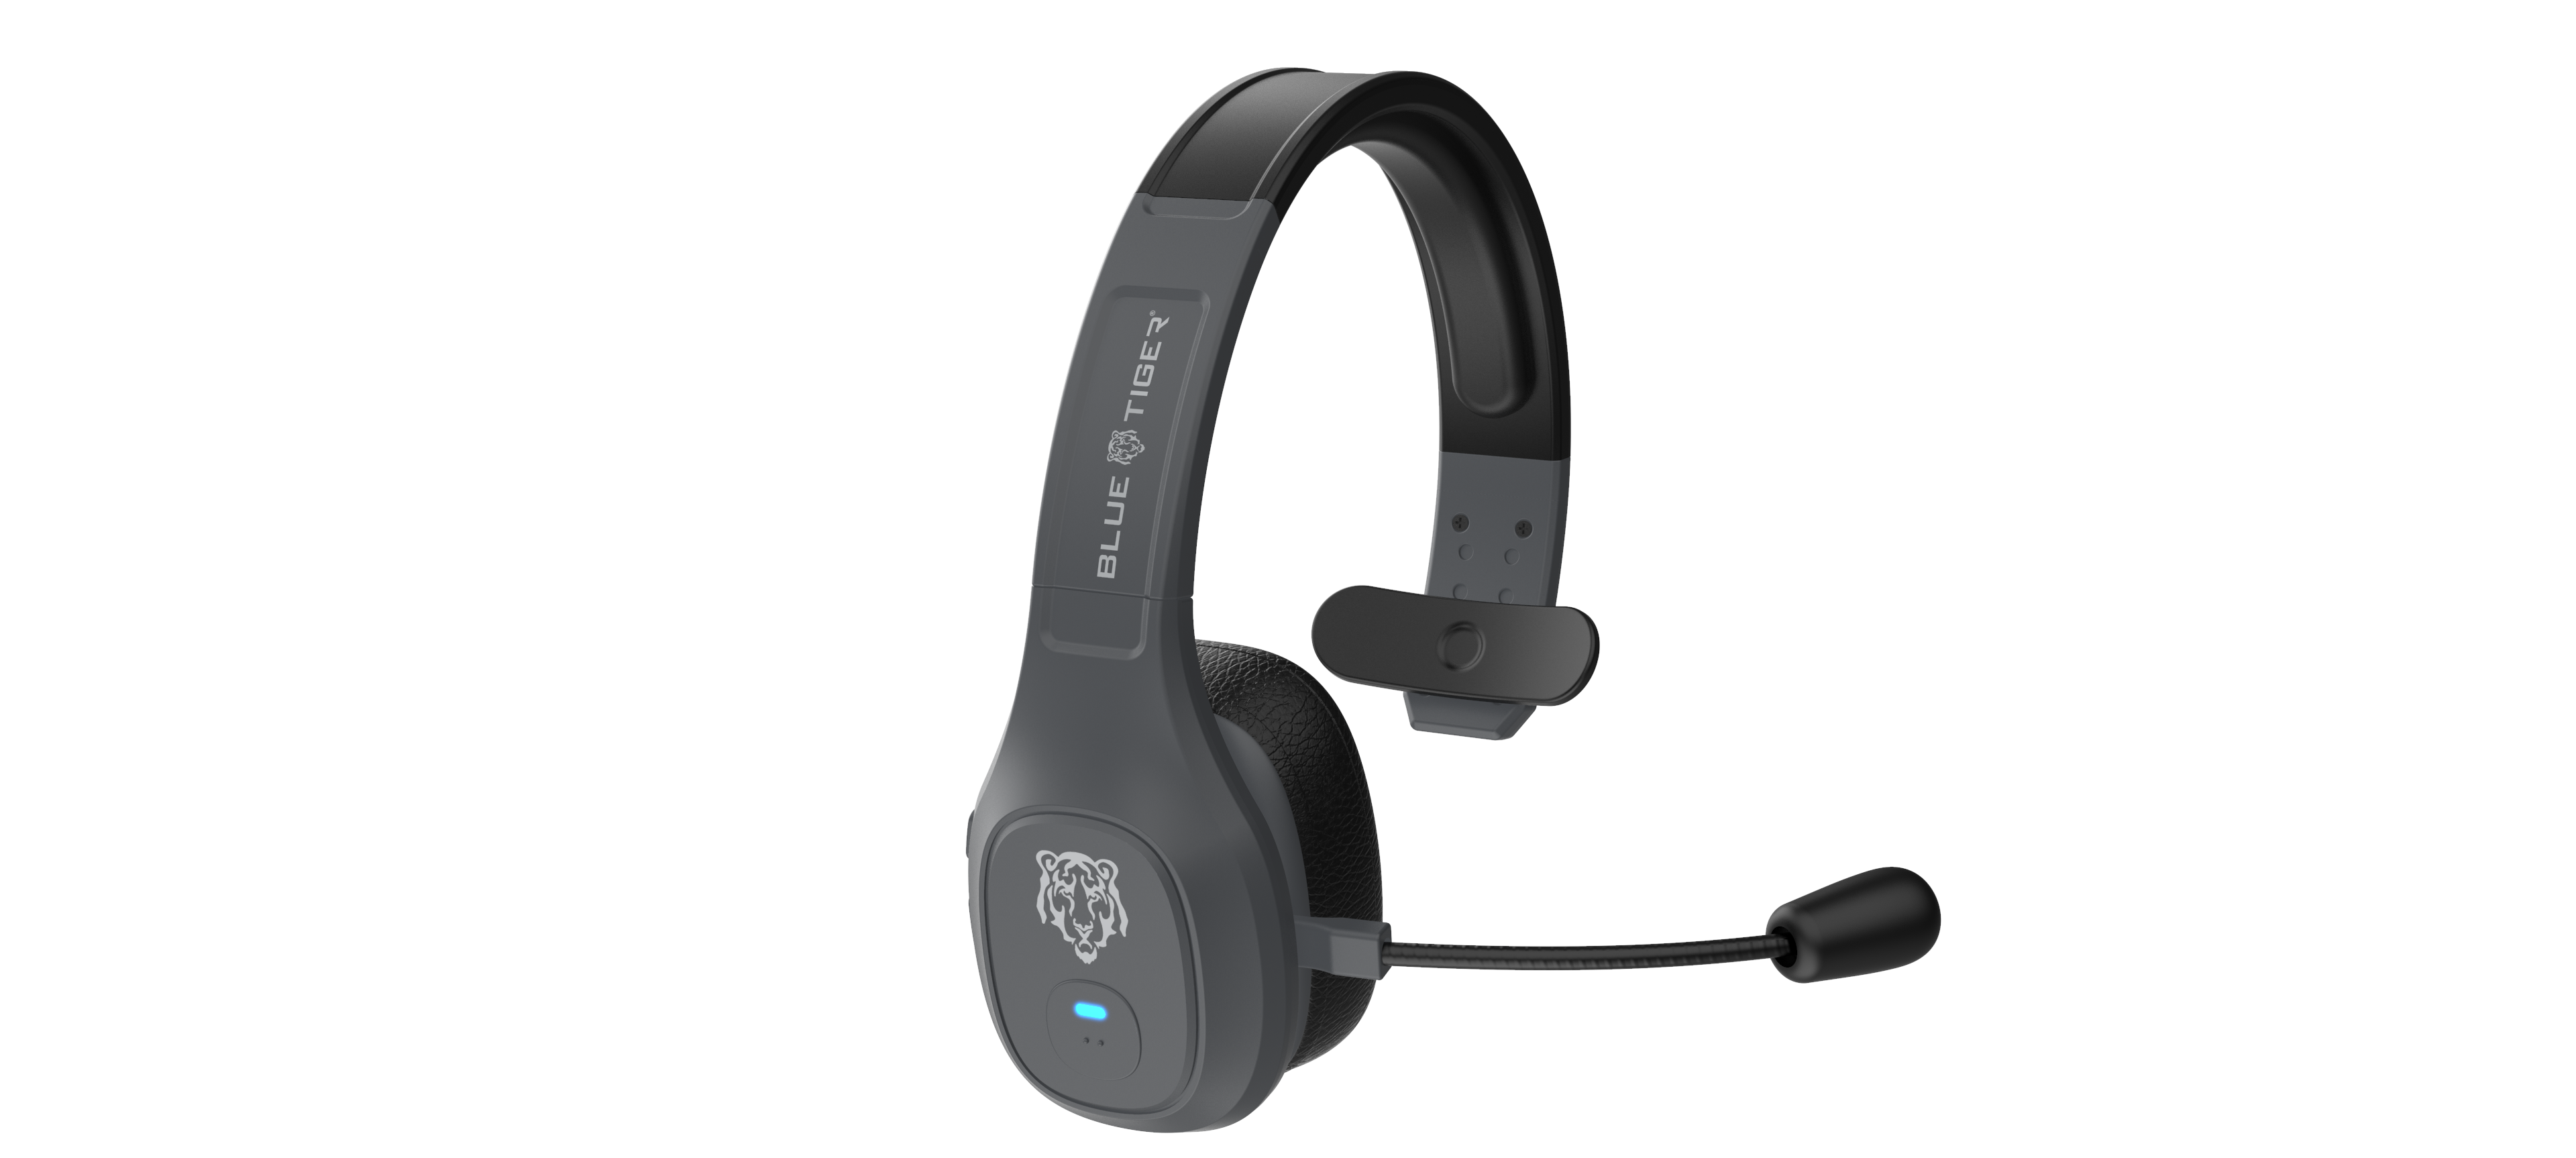 The Storm, Single Ear, Noise Cancelation Bluetooth Headset with Microphone